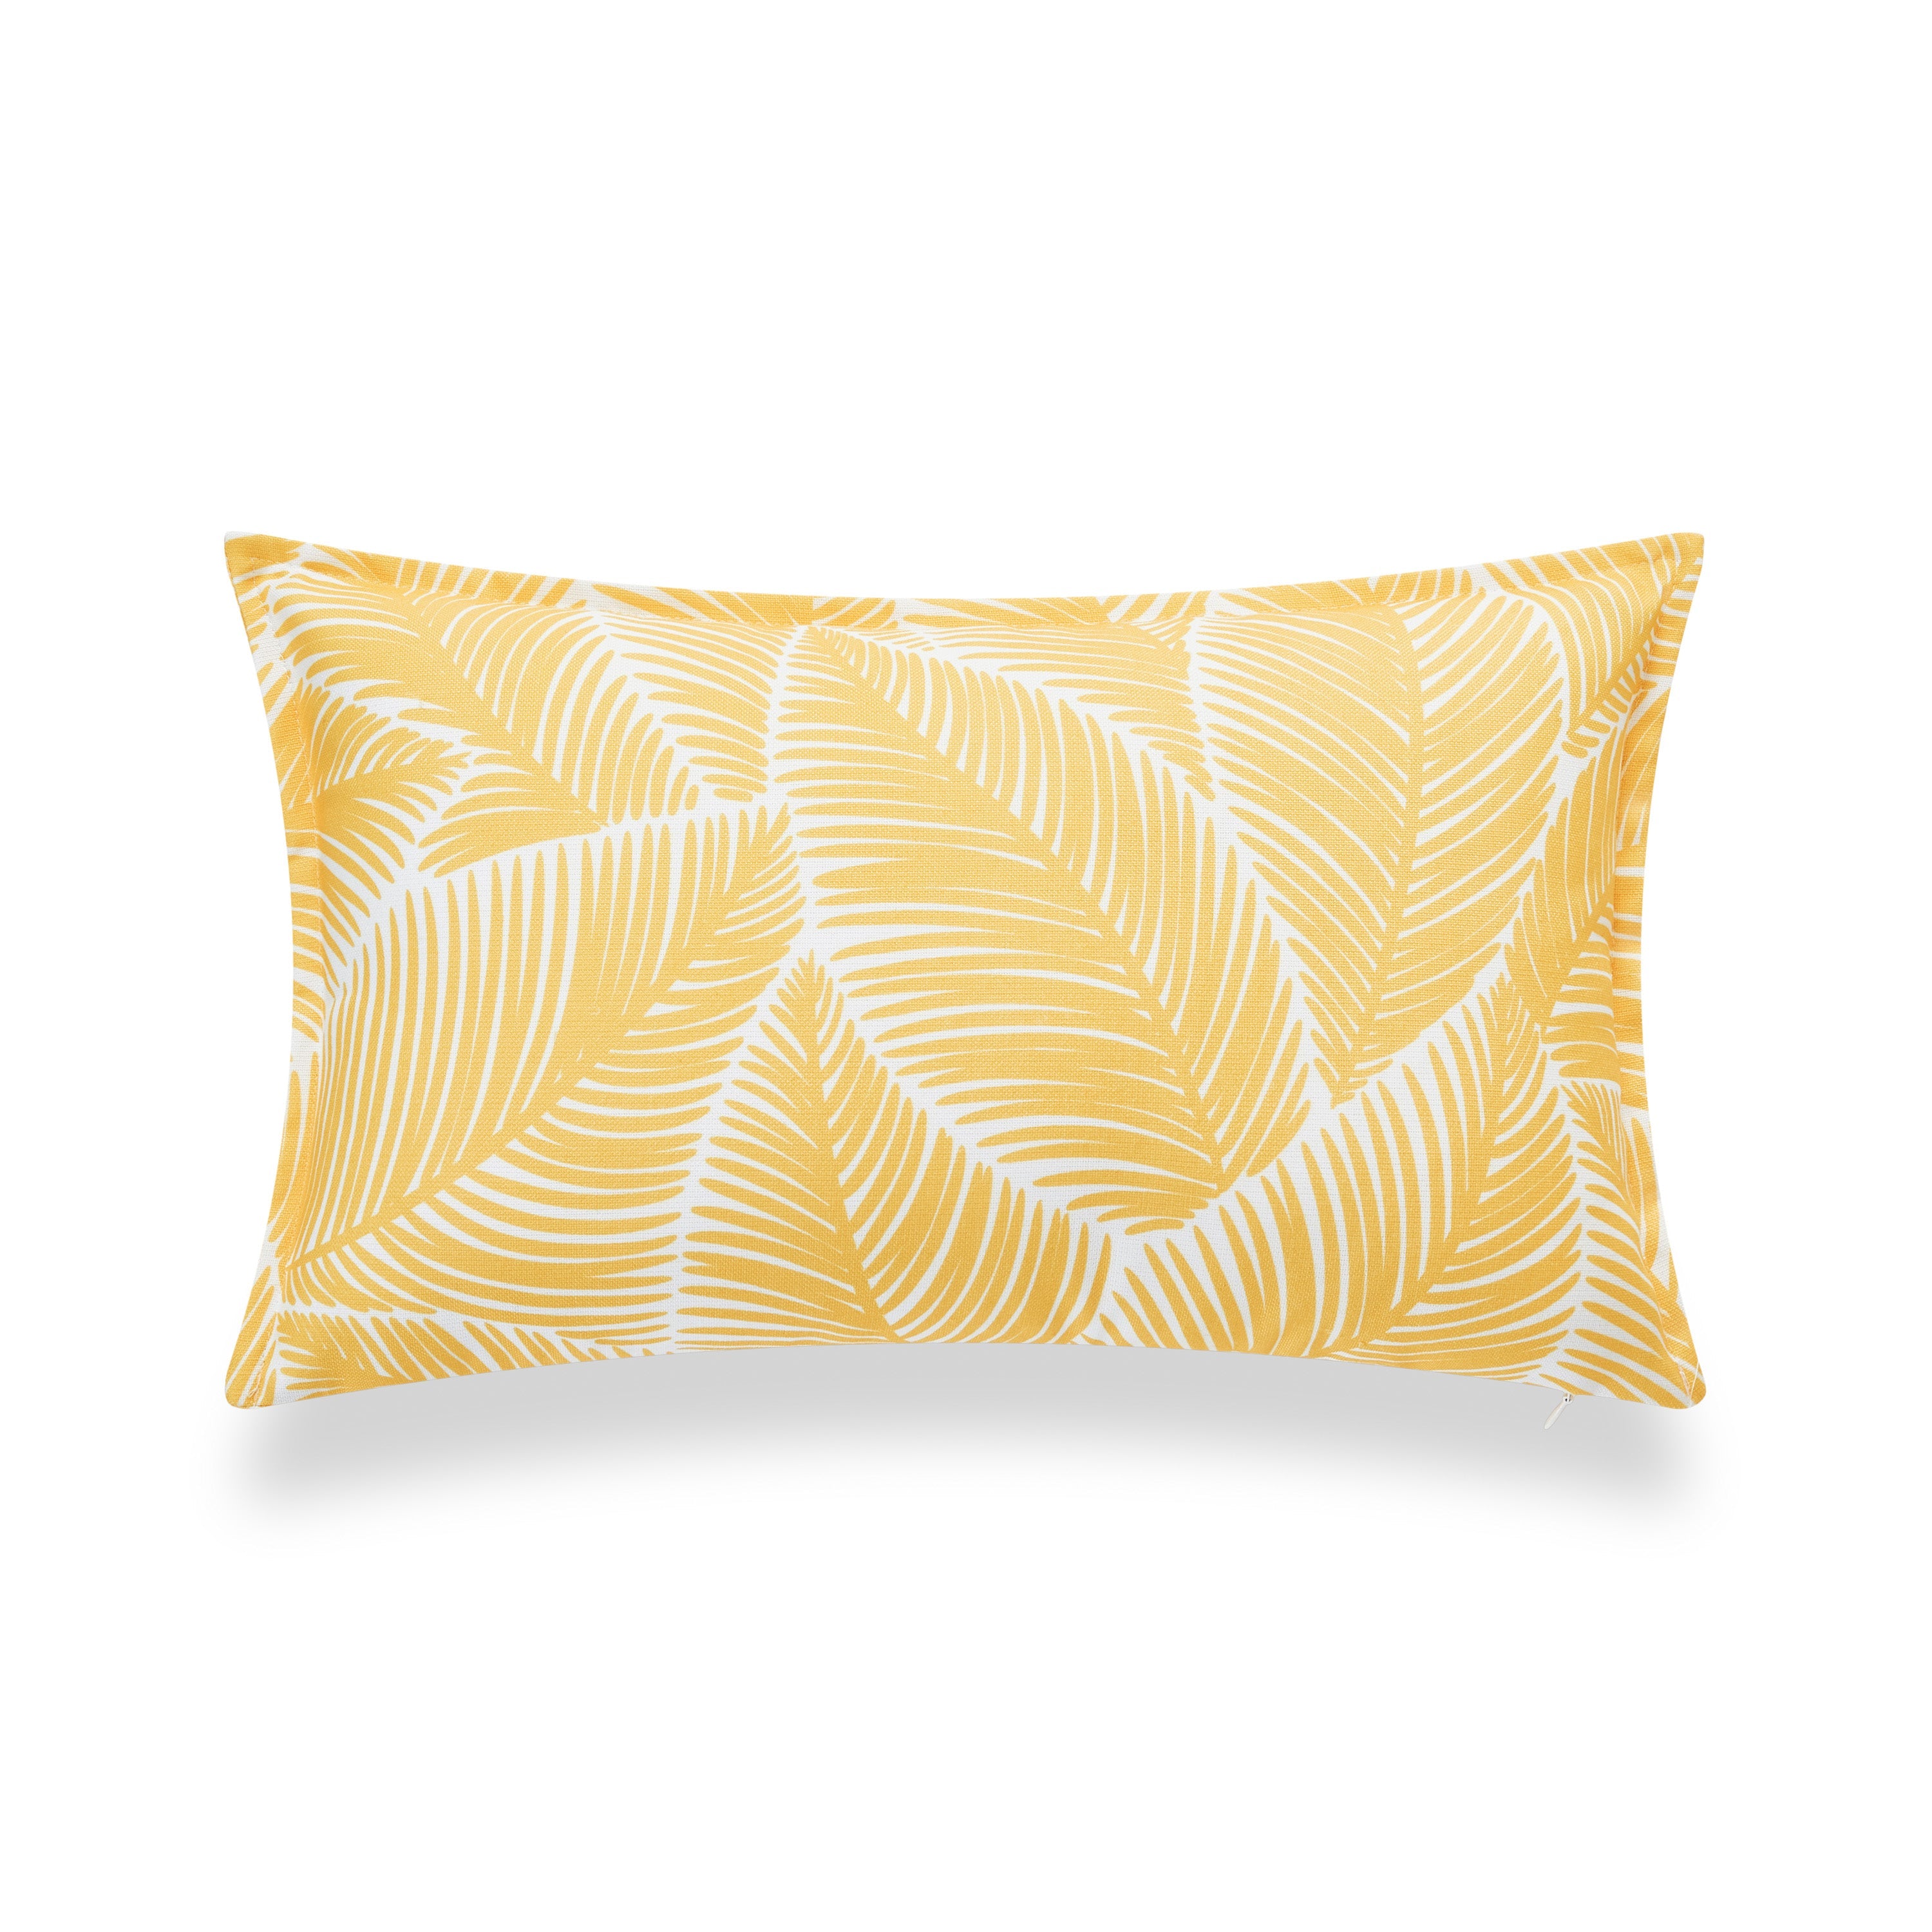 Coastal Indoor Outdoor Lumbar Pillow Cover, Palm Leaf, Pale Yellow, 12"x20"